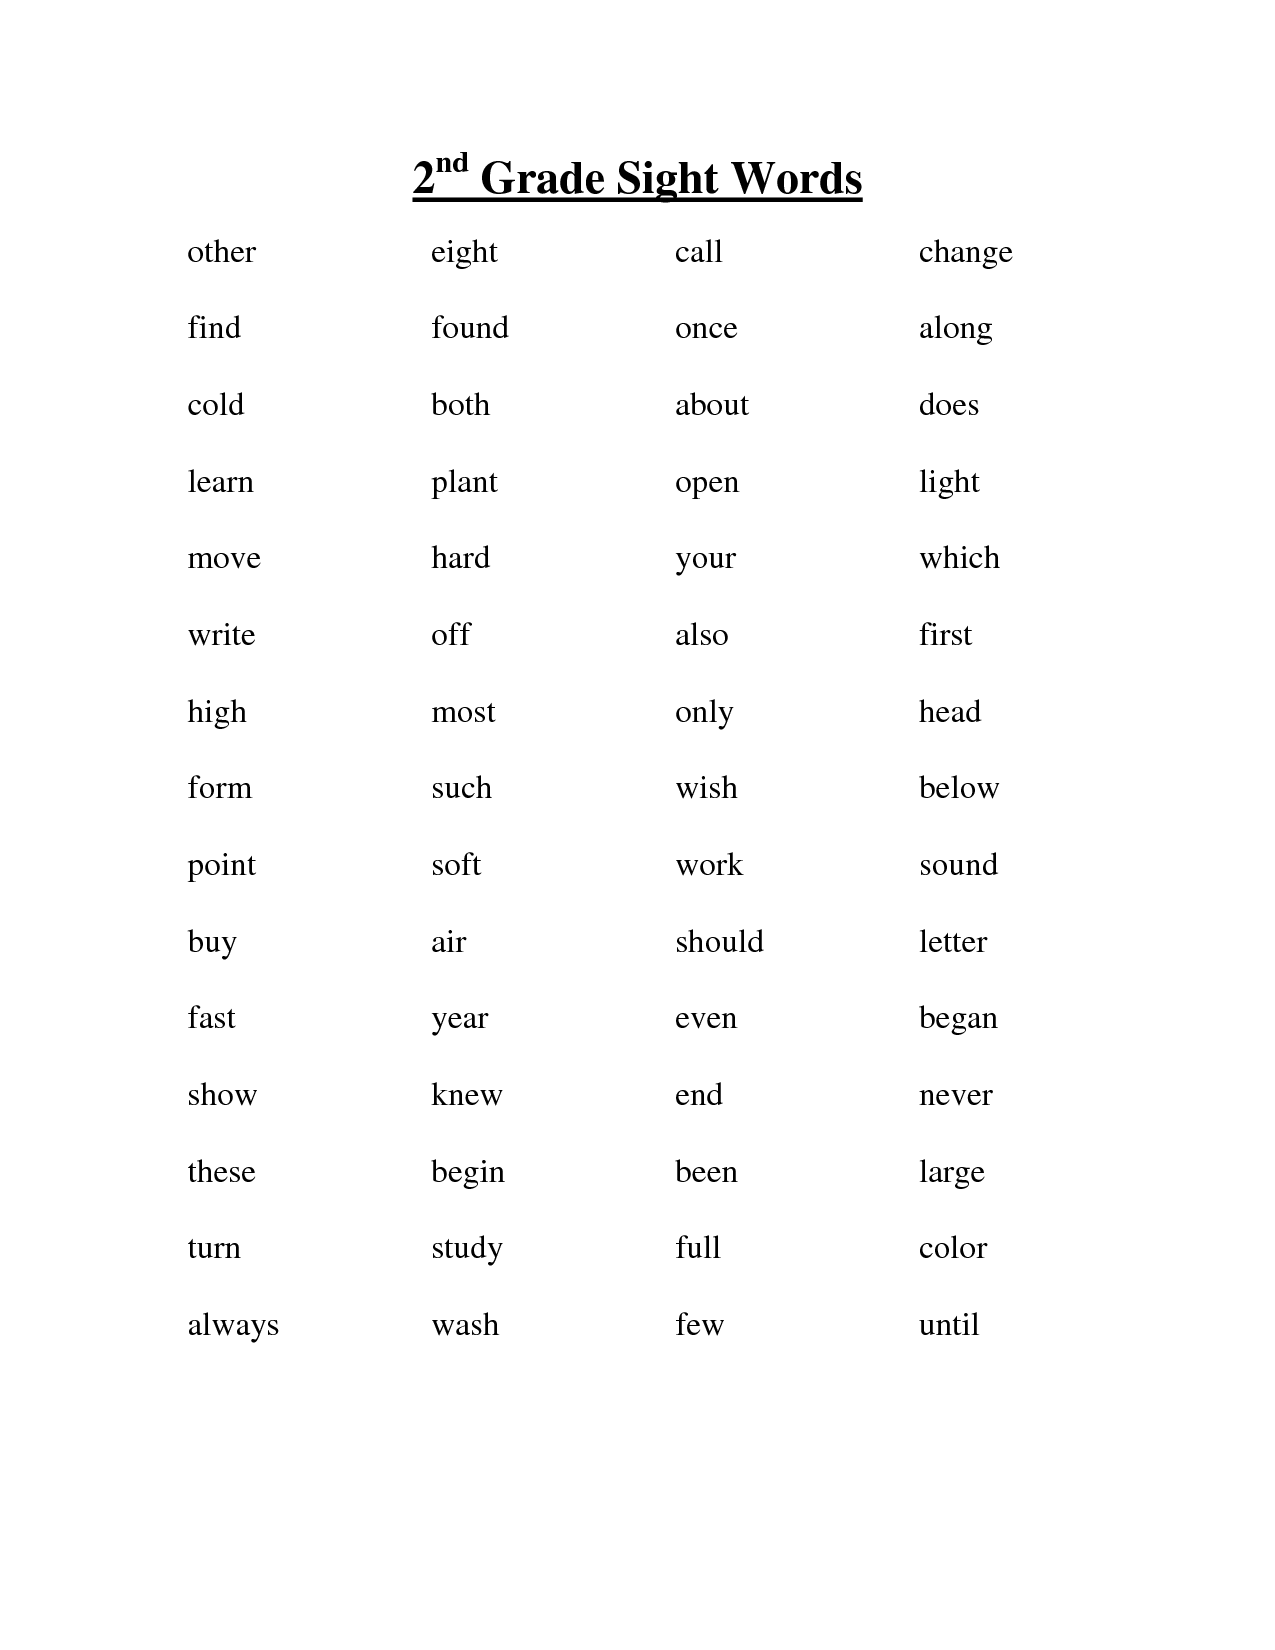 15 Best Images of 2nd Grade Sight Word Worksheet - Third ...